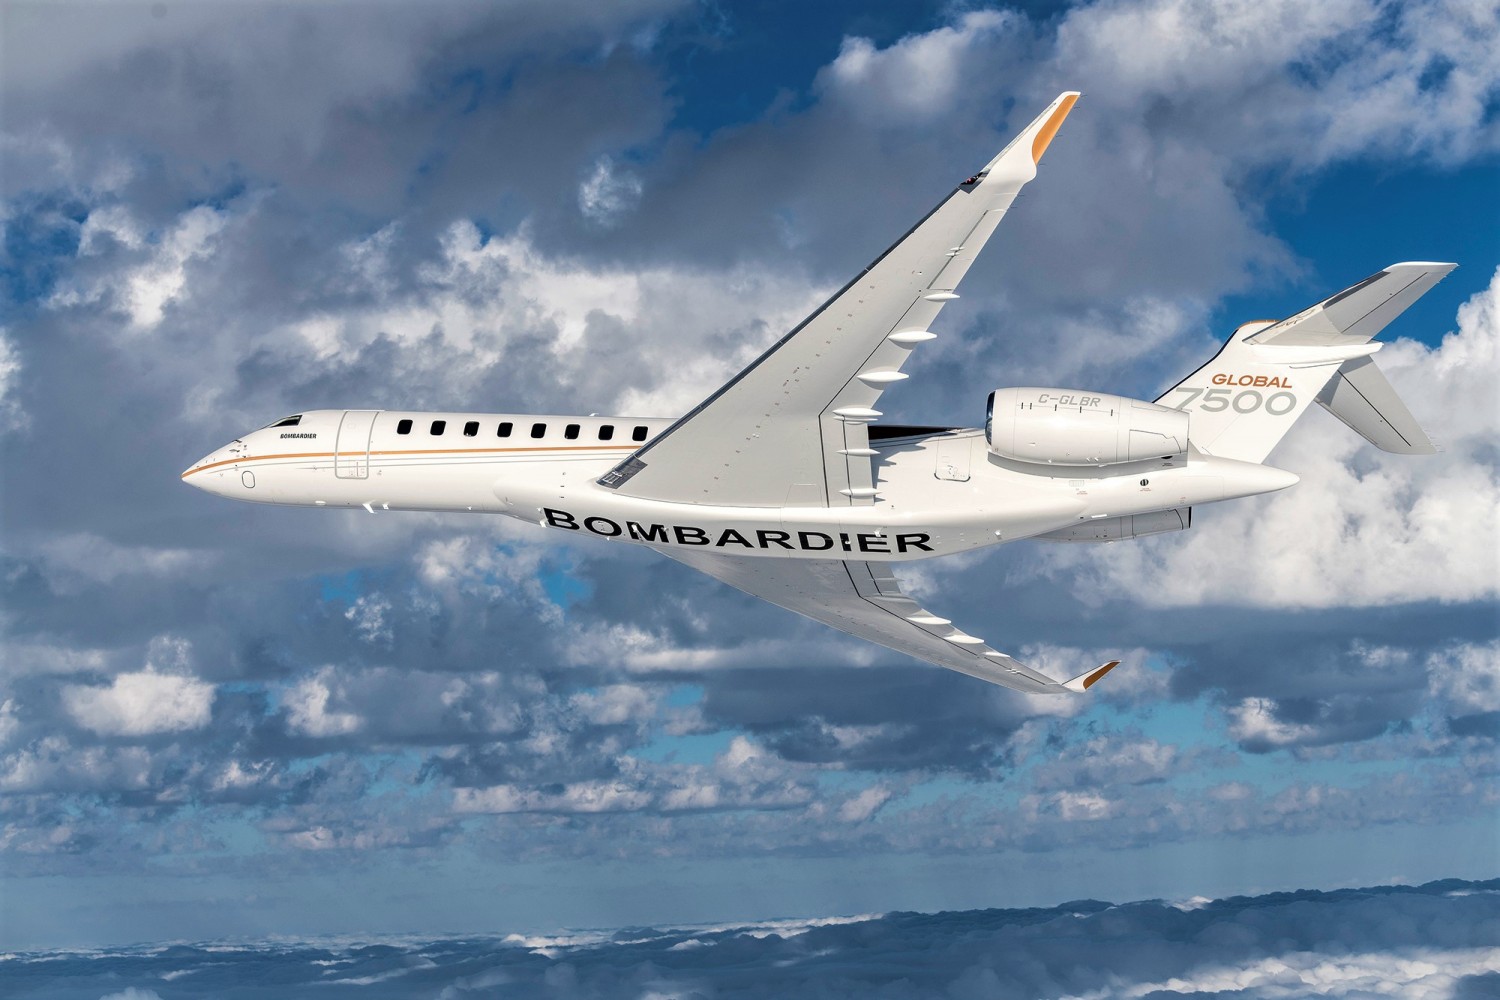 Mississauga and Bombardier want to be stewards of green aviation with new $500M Pearson facility